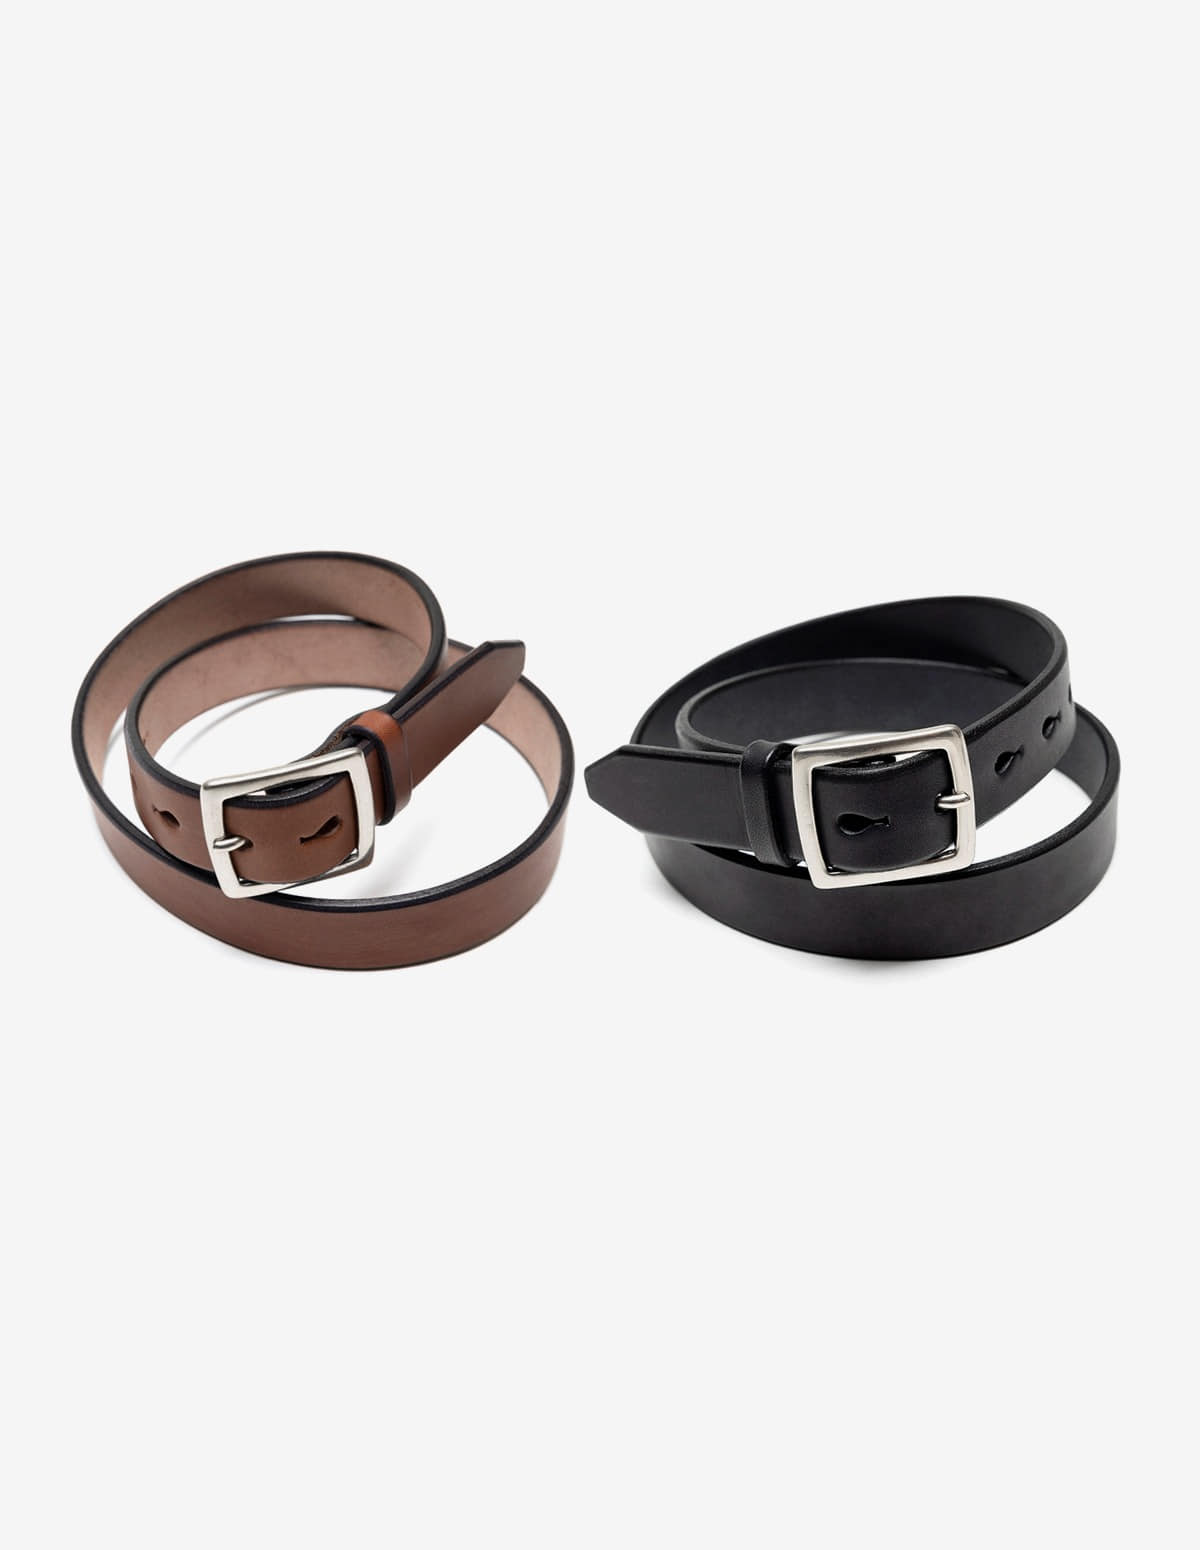 OR-7268 Benz Leather Belt